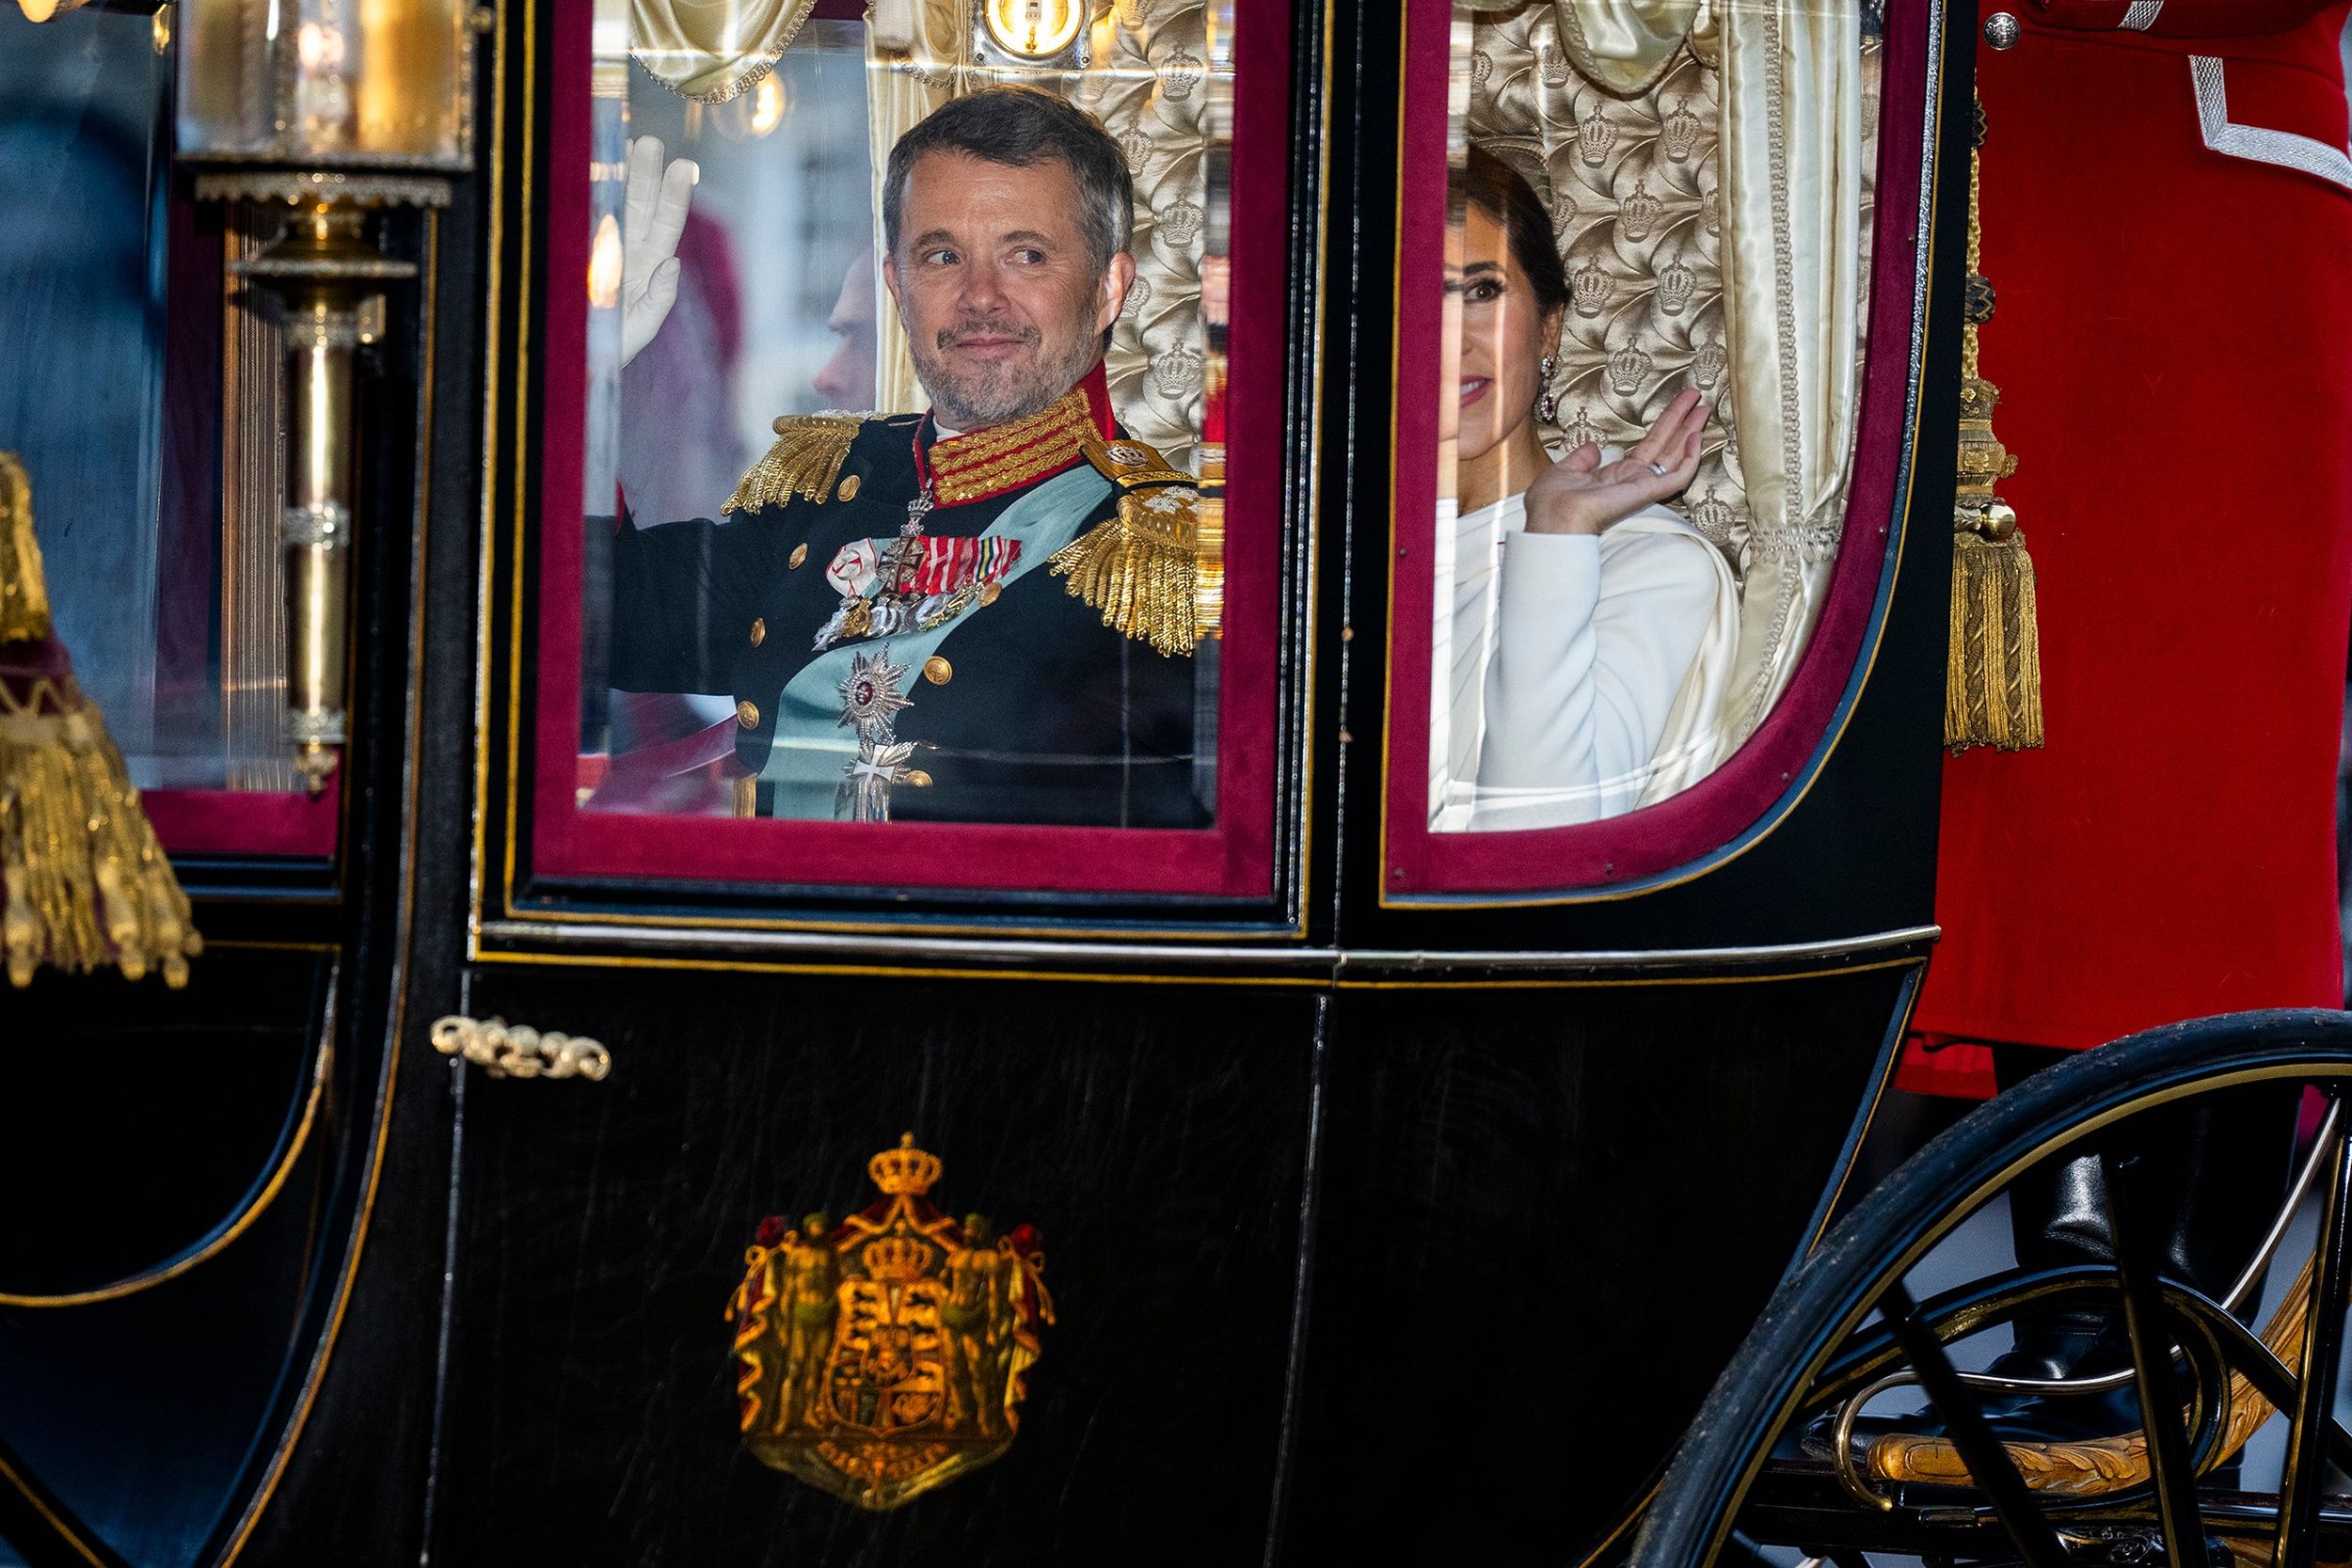 Denmark's new king, cheered by thousands, takes his throne